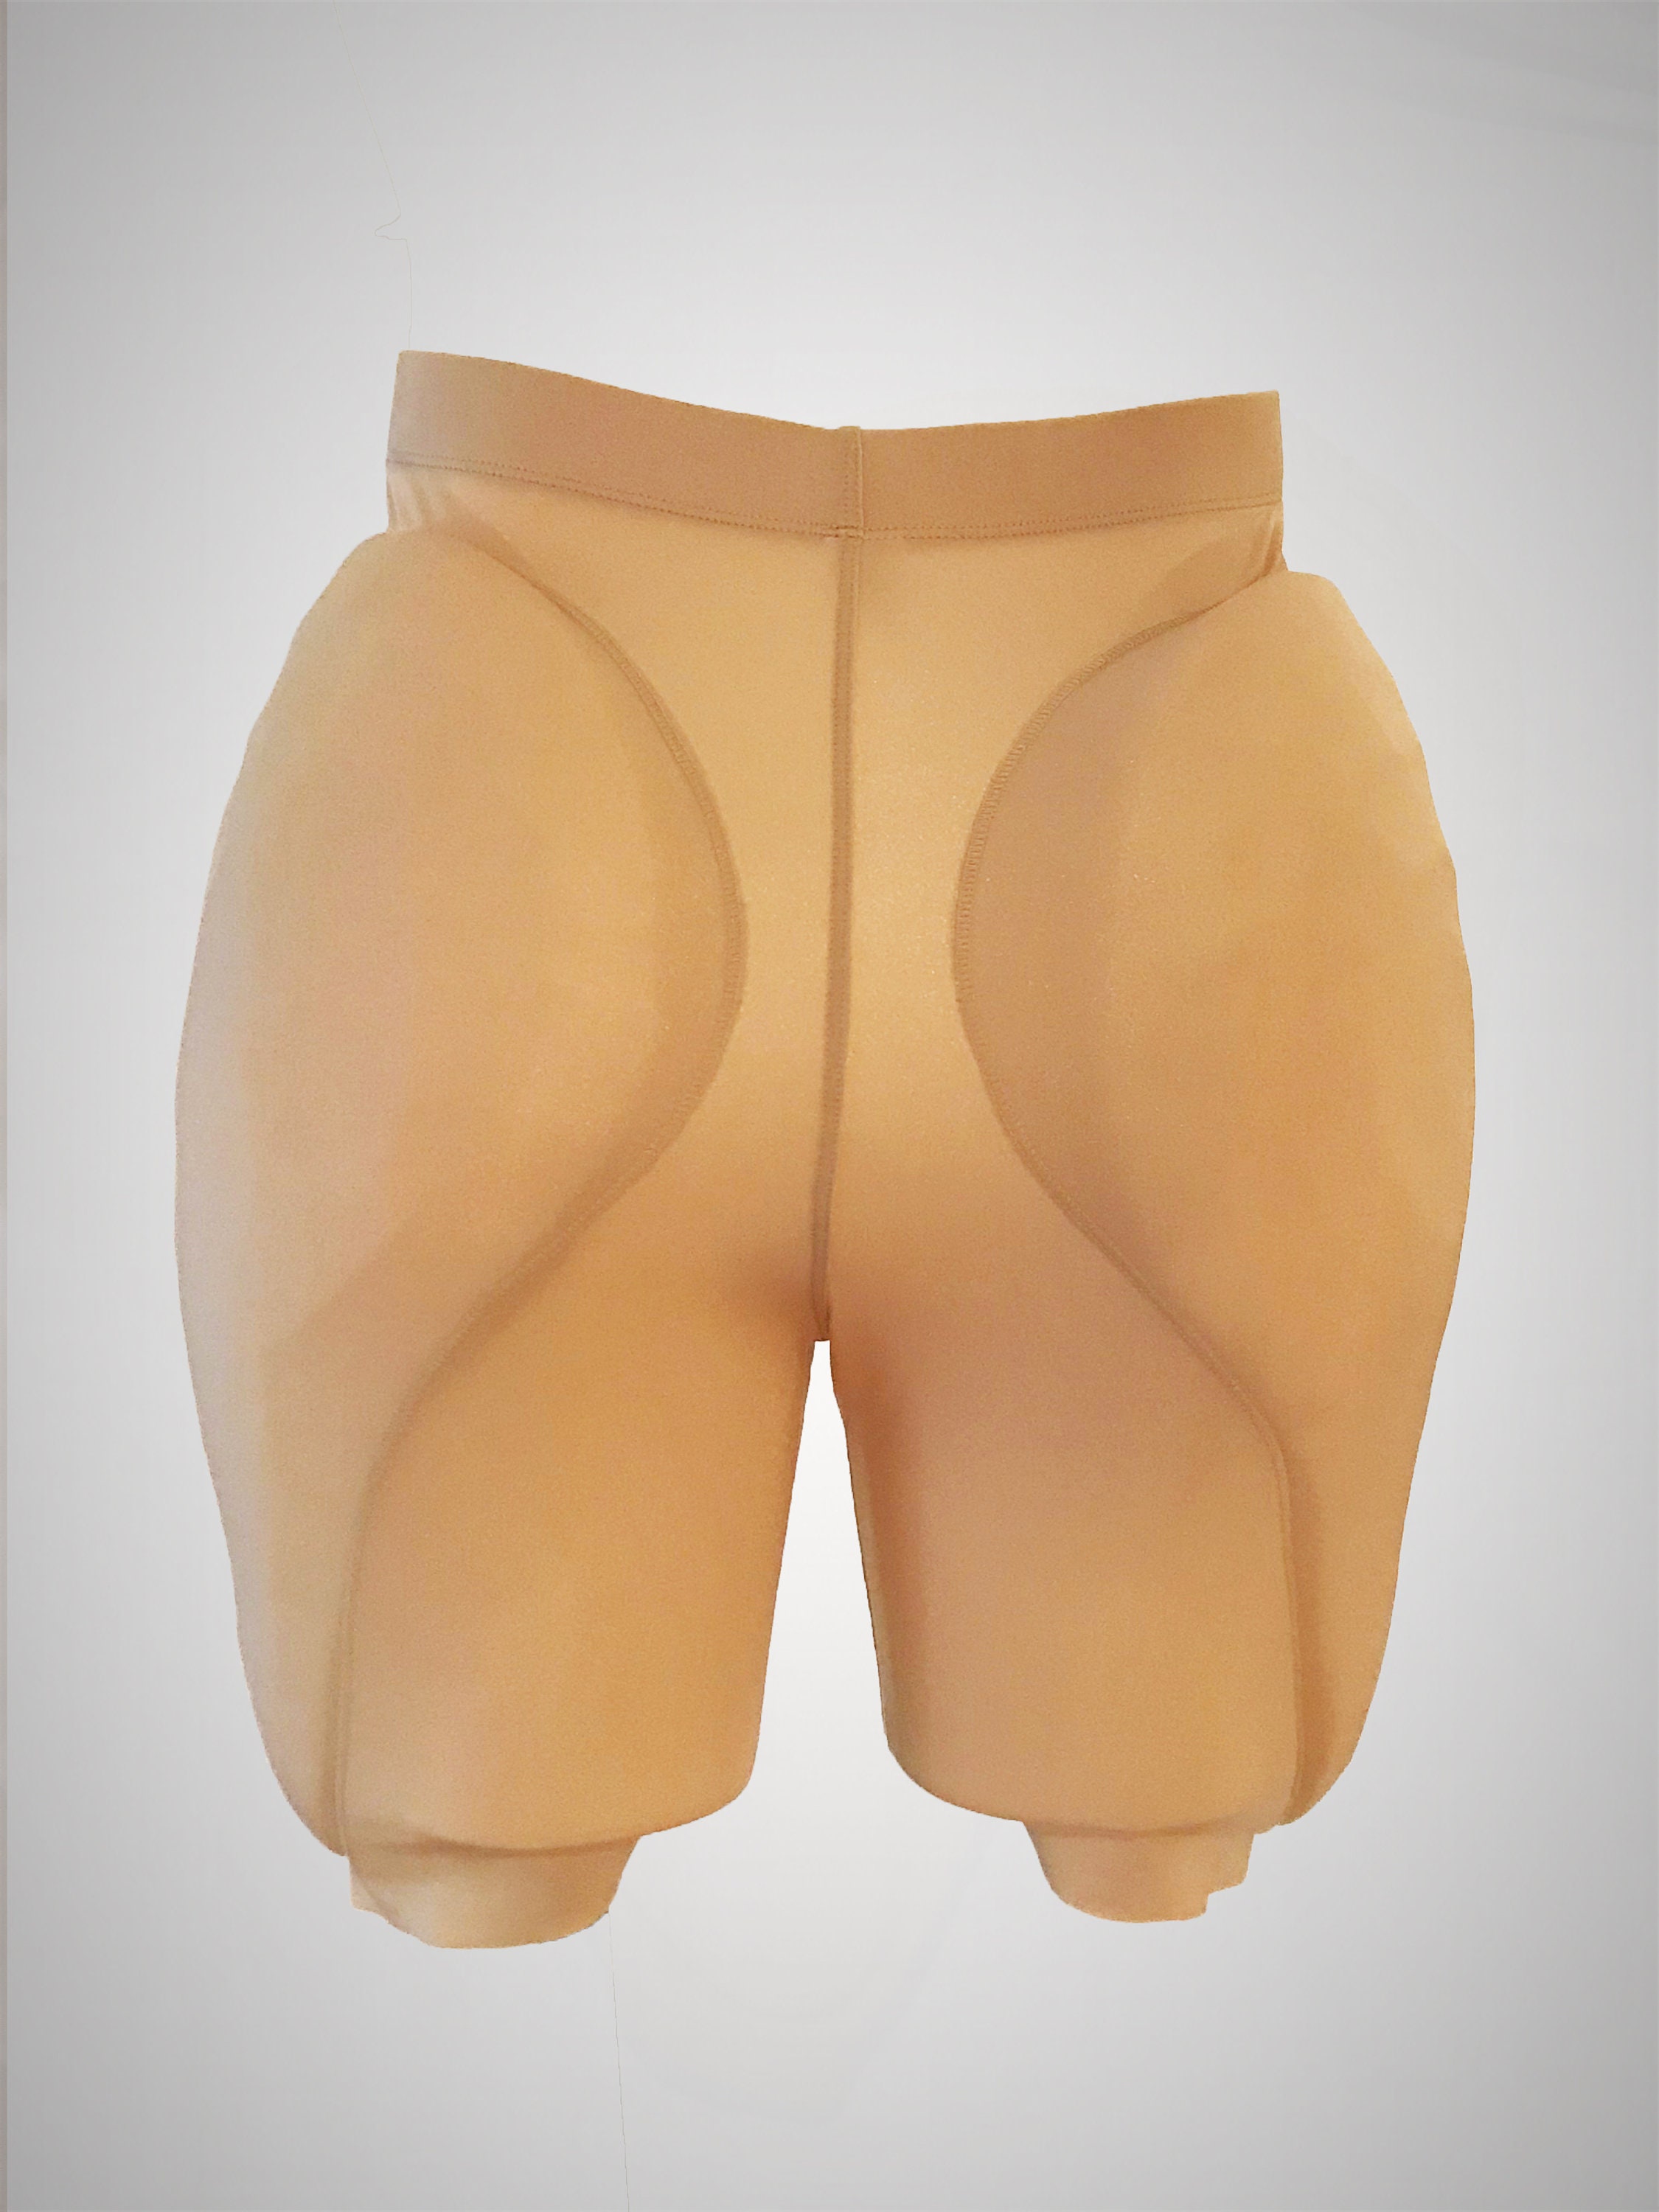 Silicone Hip Pads -  Canada